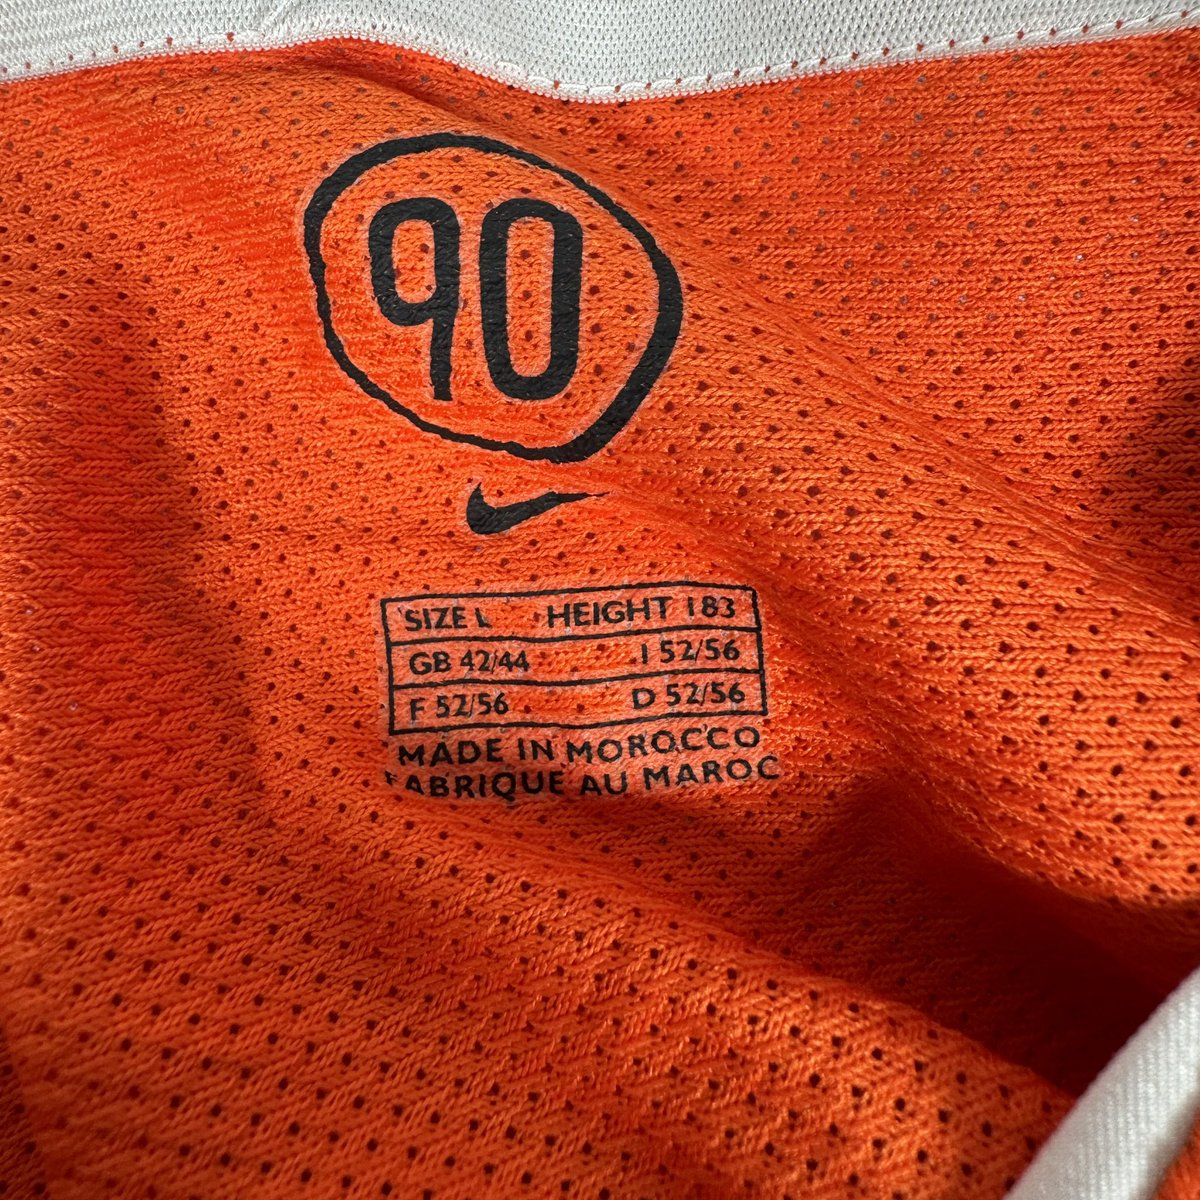 Pick of the Day ⭐️

Netherlands 2004/2005/2006 Euro Home Football Shirt 

rb.gy/vx6kju

#FootballShirt #FootballShirts